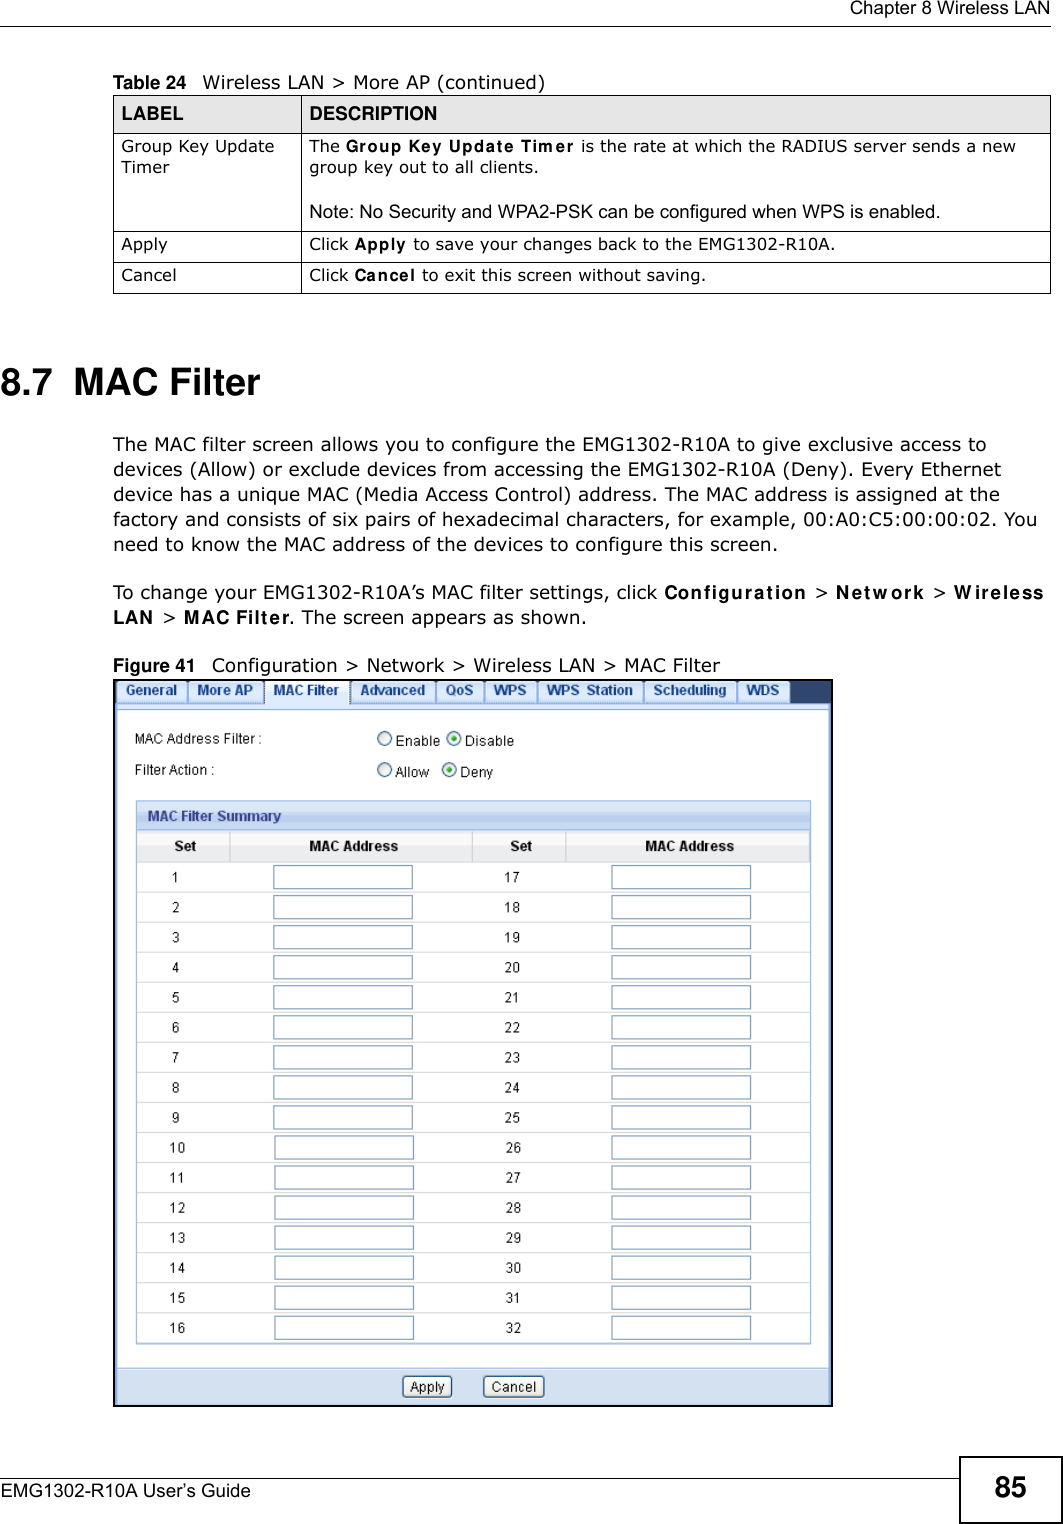  Chapter 8 Wireless LANEMG1302-R10A User’s Guide 858.7  MAC FilterThe MAC filter screen allows you to configure the EMG1302-R10A to give exclusive access to devices (Allow) or exclude devices from accessing the EMG1302-R10A (Deny). Every Ethernet device has a unique MAC (Media Access Control) address. The MAC address is assigned at the factory and consists of six pairs of hexadecimal characters, for example, 00:A0:C5:00:00:02. You need to know the MAC address of the devices to configure this screen.To change your EMG1302-R10A’s MAC filter settings, click Configu r a t ion  &gt; Net w ork &gt; W irele ss LAN  &gt; M AC Filt er. The screen appears as shown.Figure 41   Configuration &gt; Network &gt; Wireless LAN &gt; MAC FilterGroup Key Update TimerThe Group Ke y Update Tim e r  is the rate at which the RADIUS server sends a new group key out to all clients.Note: No Security and WPA2-PSK can be configured when WPS is enabled.Apply Click Apply to save your changes back to the EMG1302-R10A.Cancel Click Cancel to exit this screen without saving.Table 24   Wireless LAN &gt; More AP (continued)LABEL DESCRIPTION